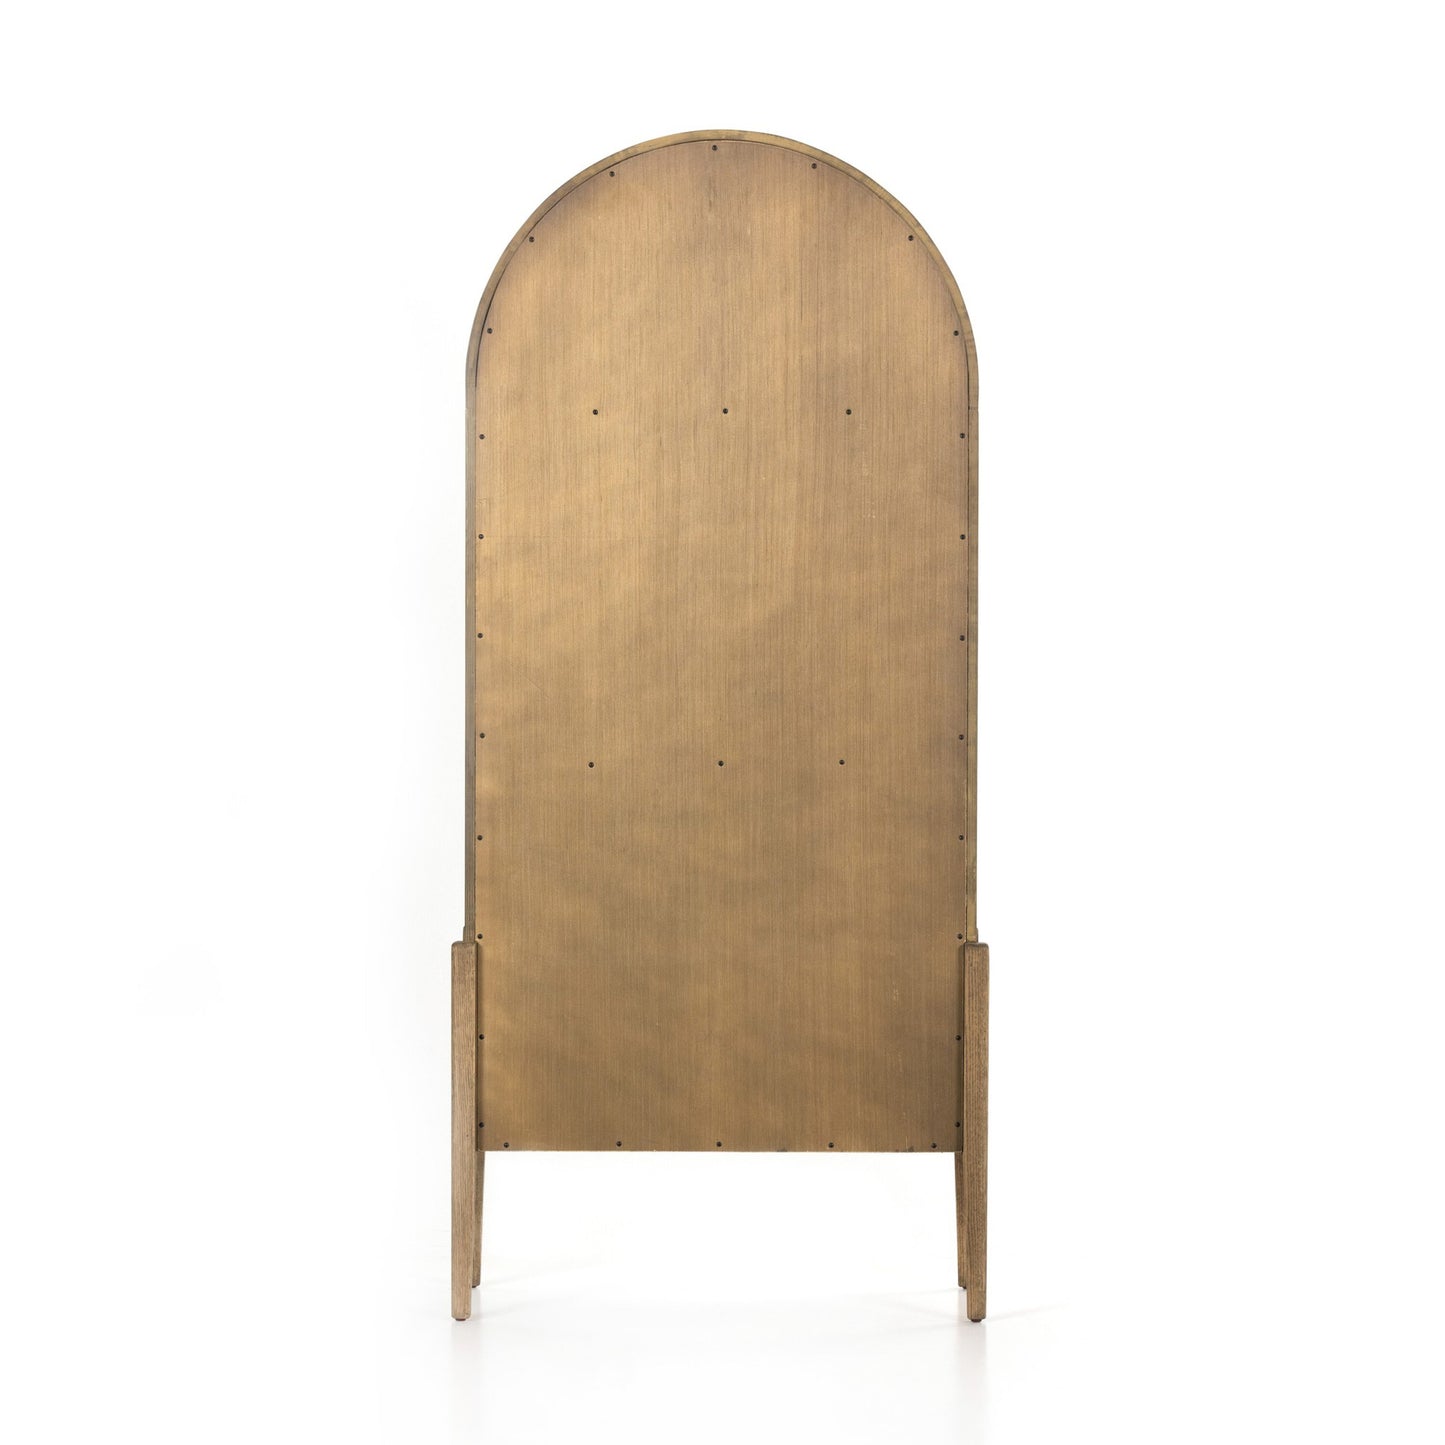 Tolle cabinet - drifted oak solid-antique brass